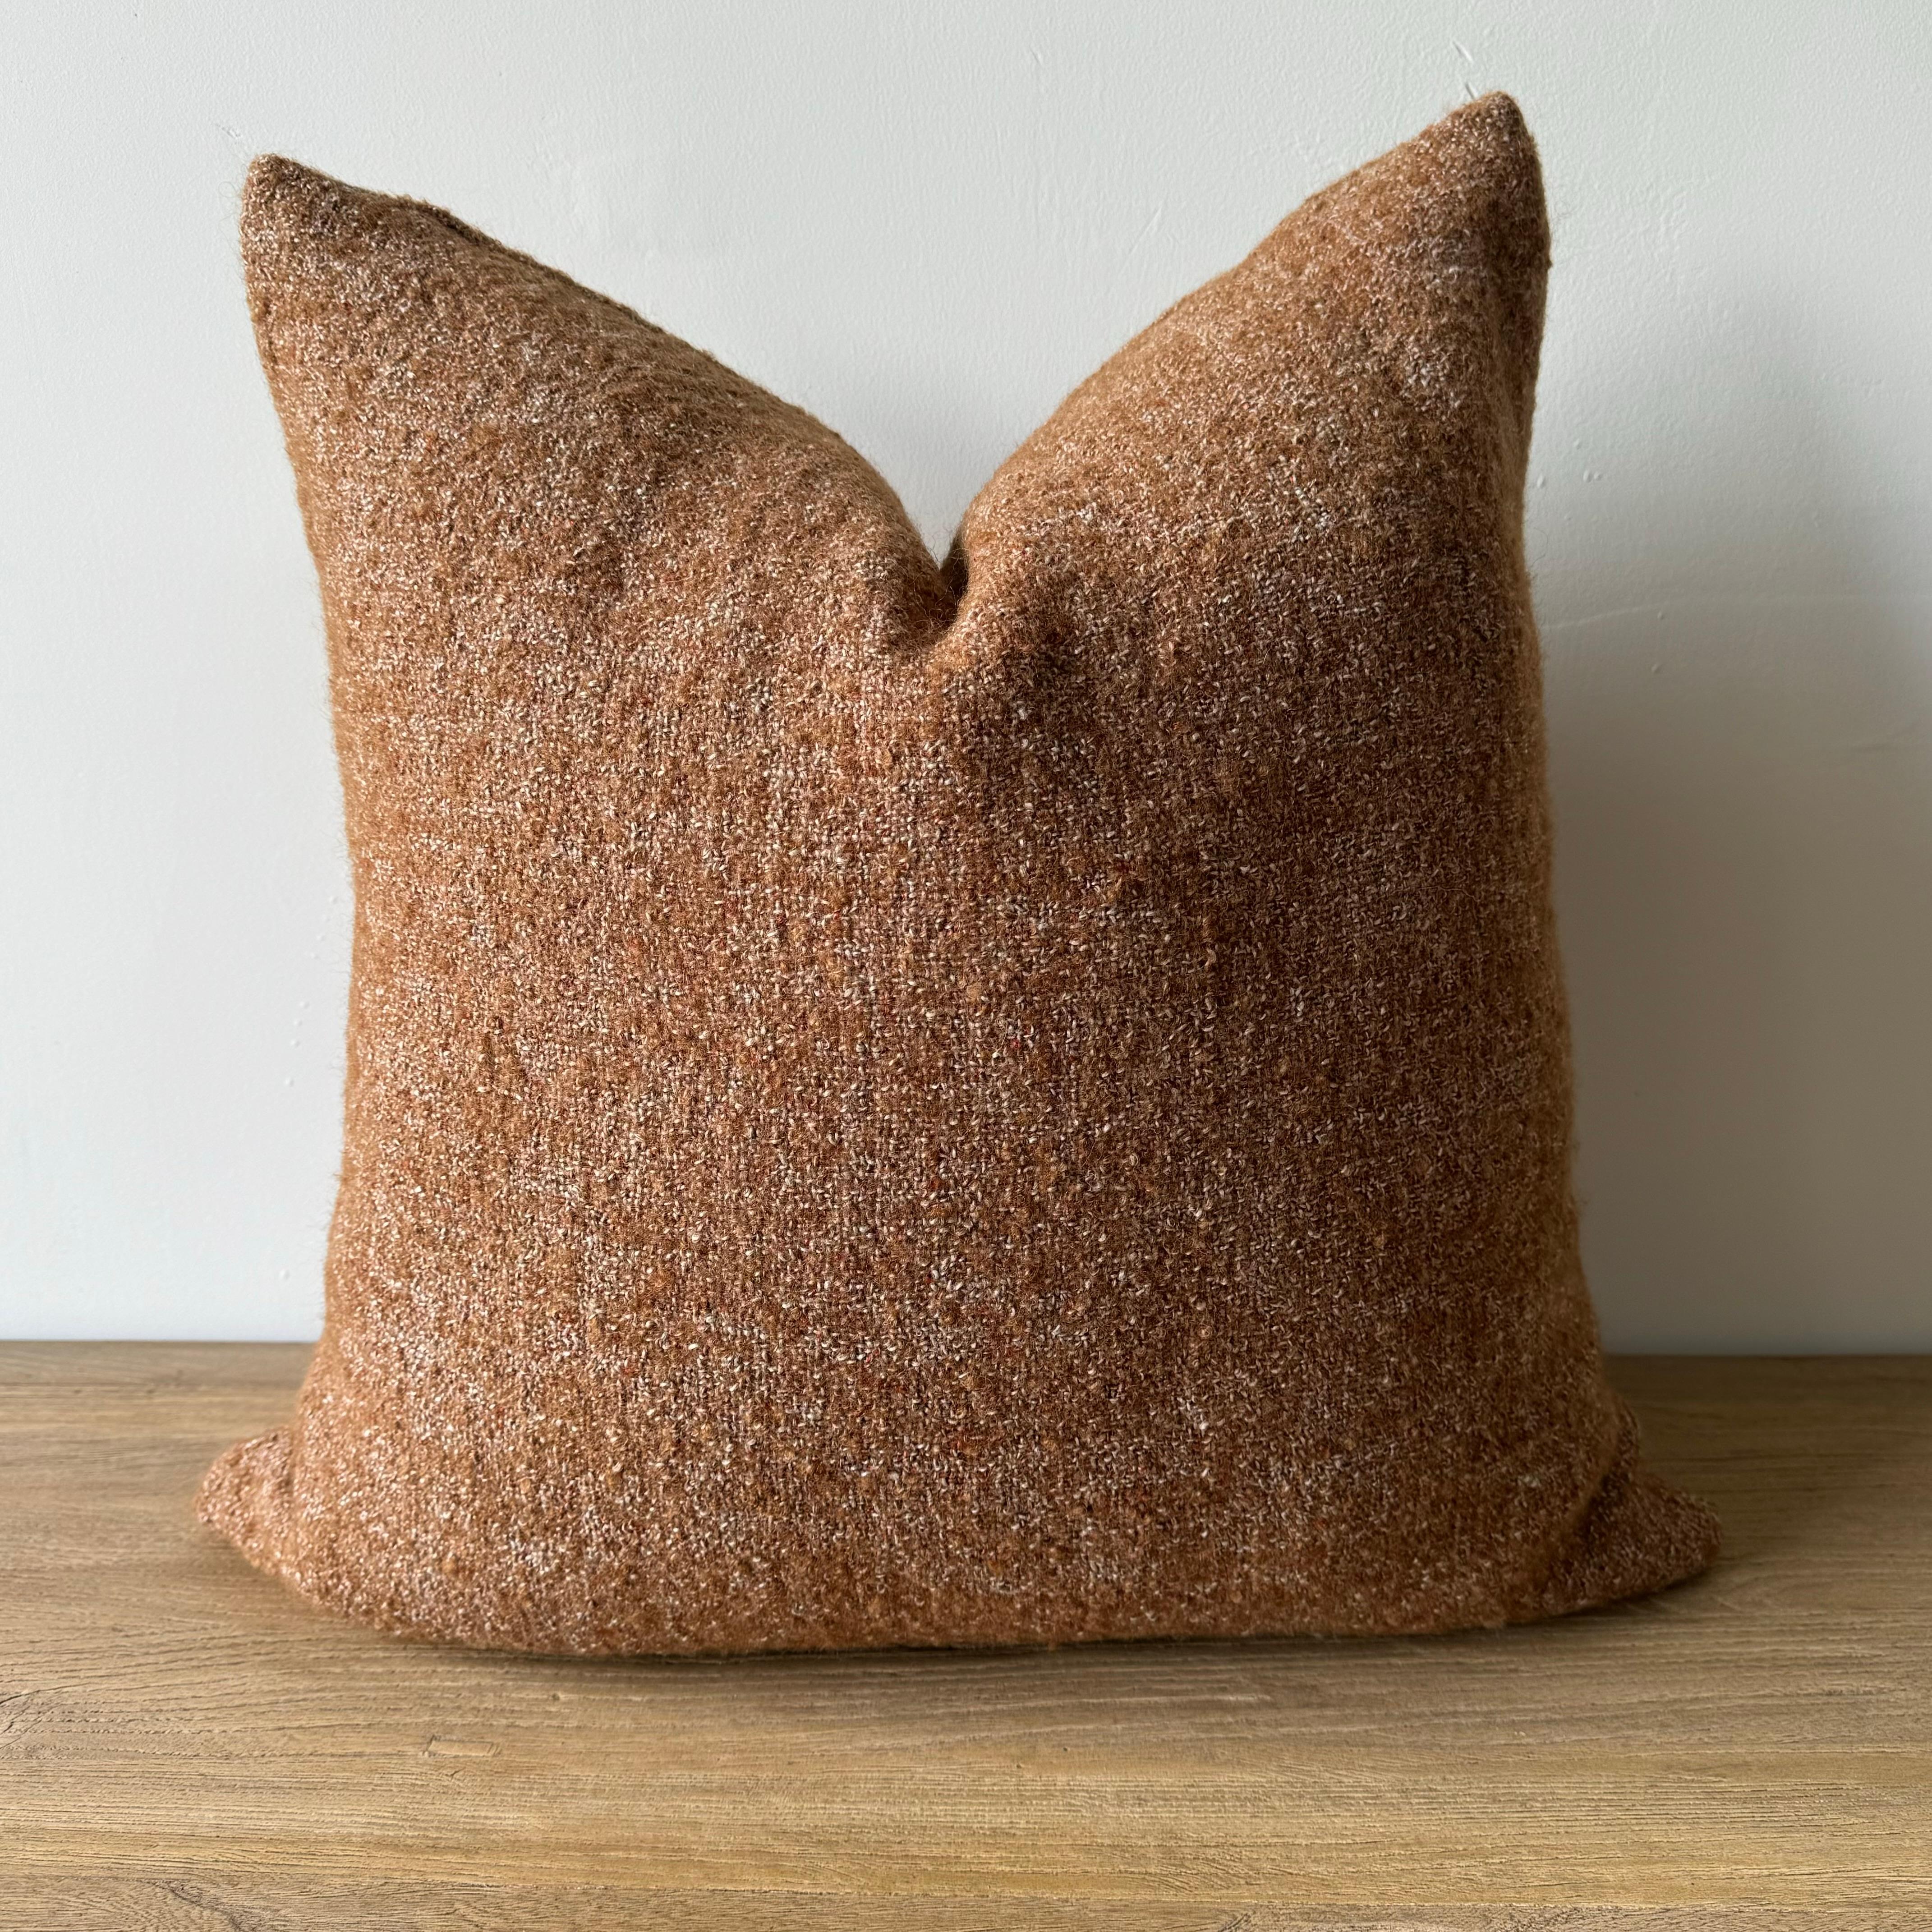 Rusty /Terracotta /Brown and Oatmeal Wool Accent Pillow
Rusty brown and natural flax oatmeal woven fibers in a stonewash finish create this luxurious soft pillow. Sewn with an antique brass zipper closure and overlocked edges. We offer custom sizes,